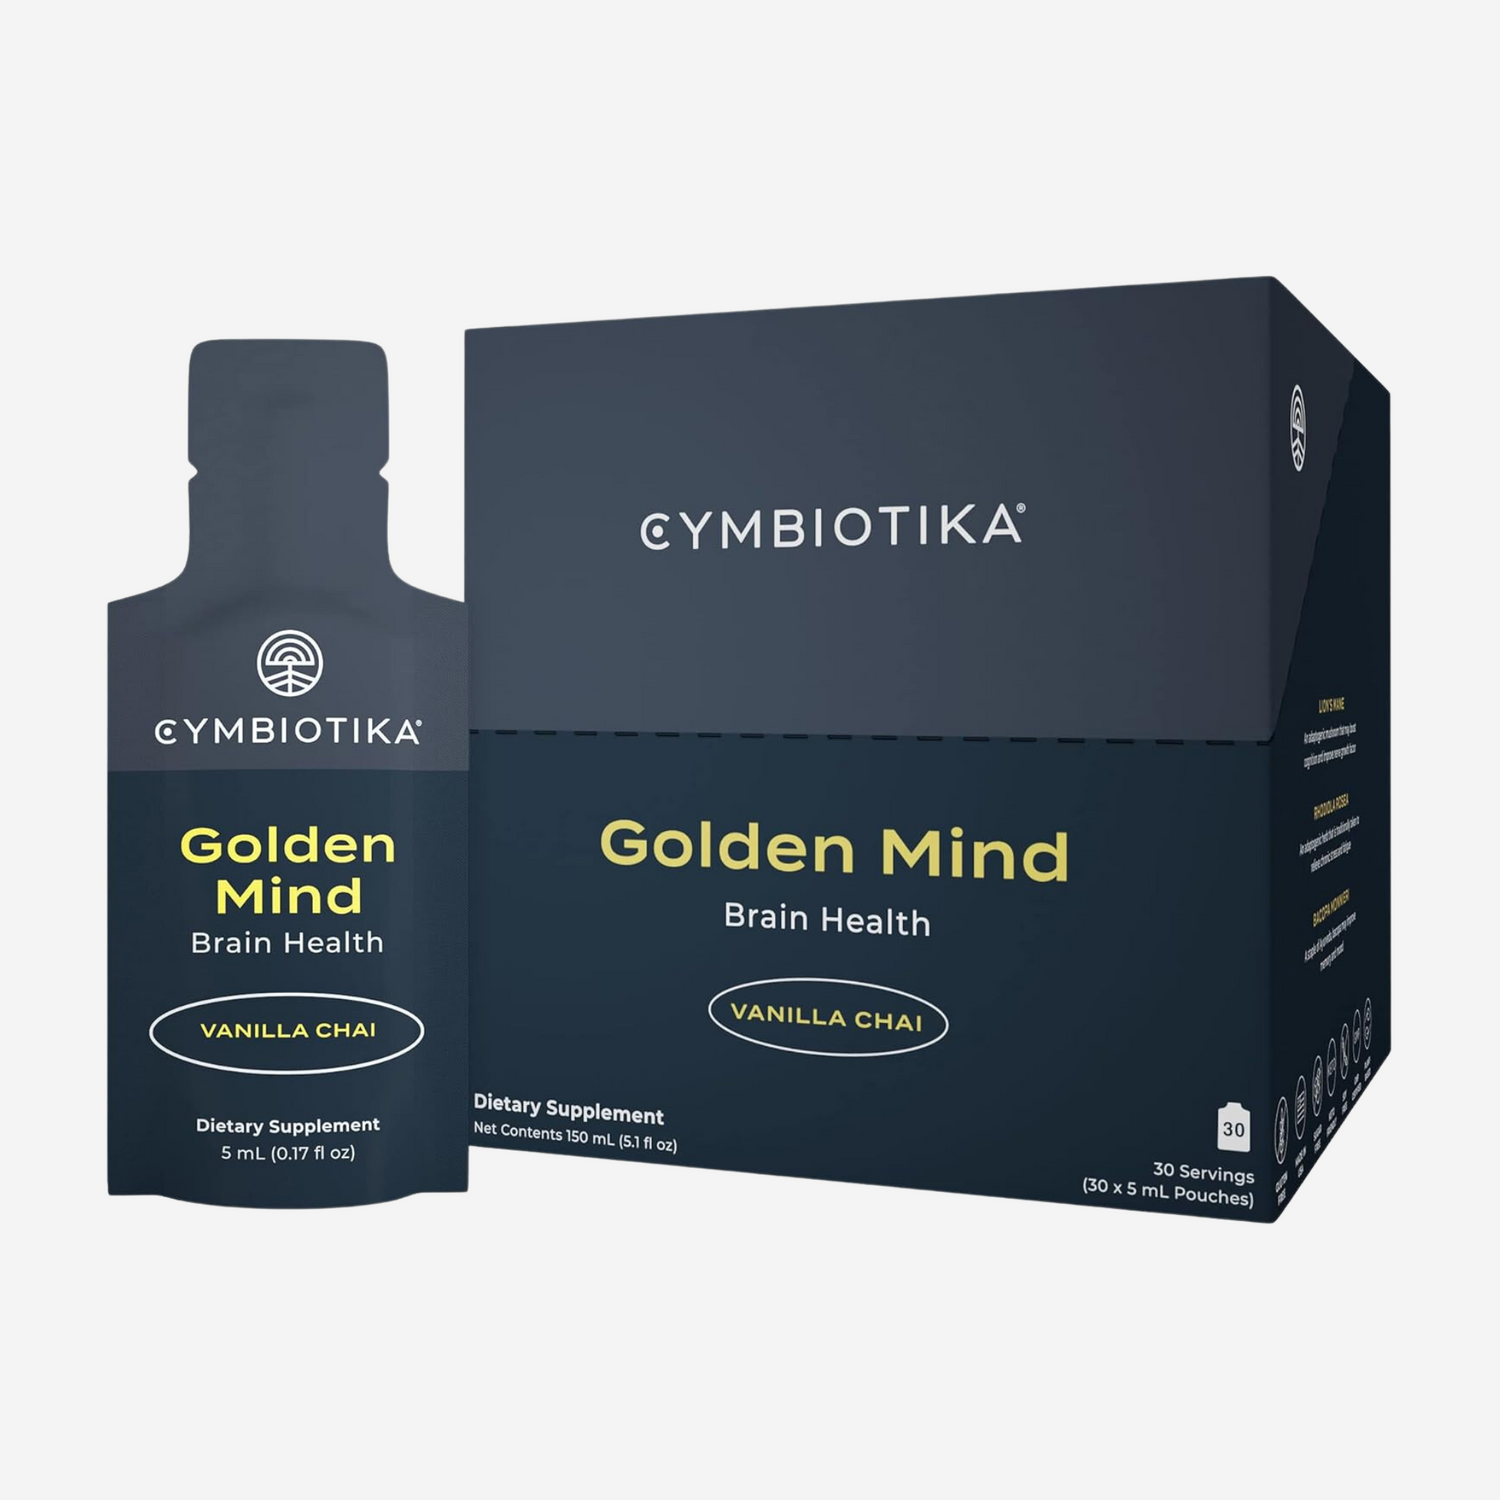 CYMBIOTIKA Golden Mind Brain Memory Focus Supplement for Adults, Liquid Nootropic Energy Supplements 5ml Pouches, 30 Pack